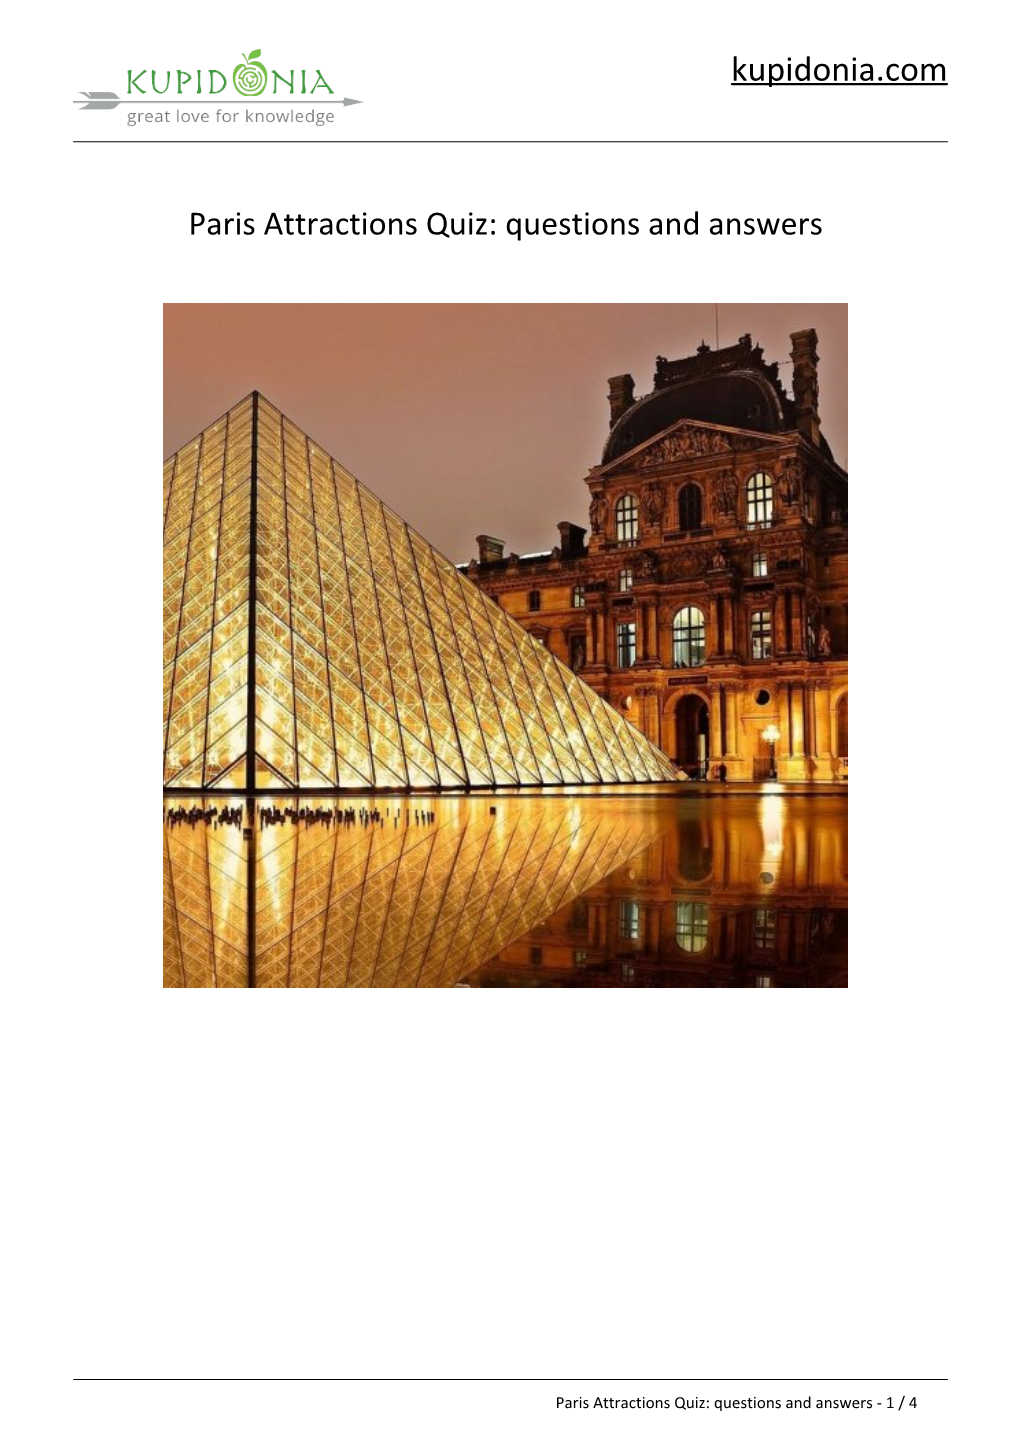 Paris Attractions Quiz: Questions and Answers